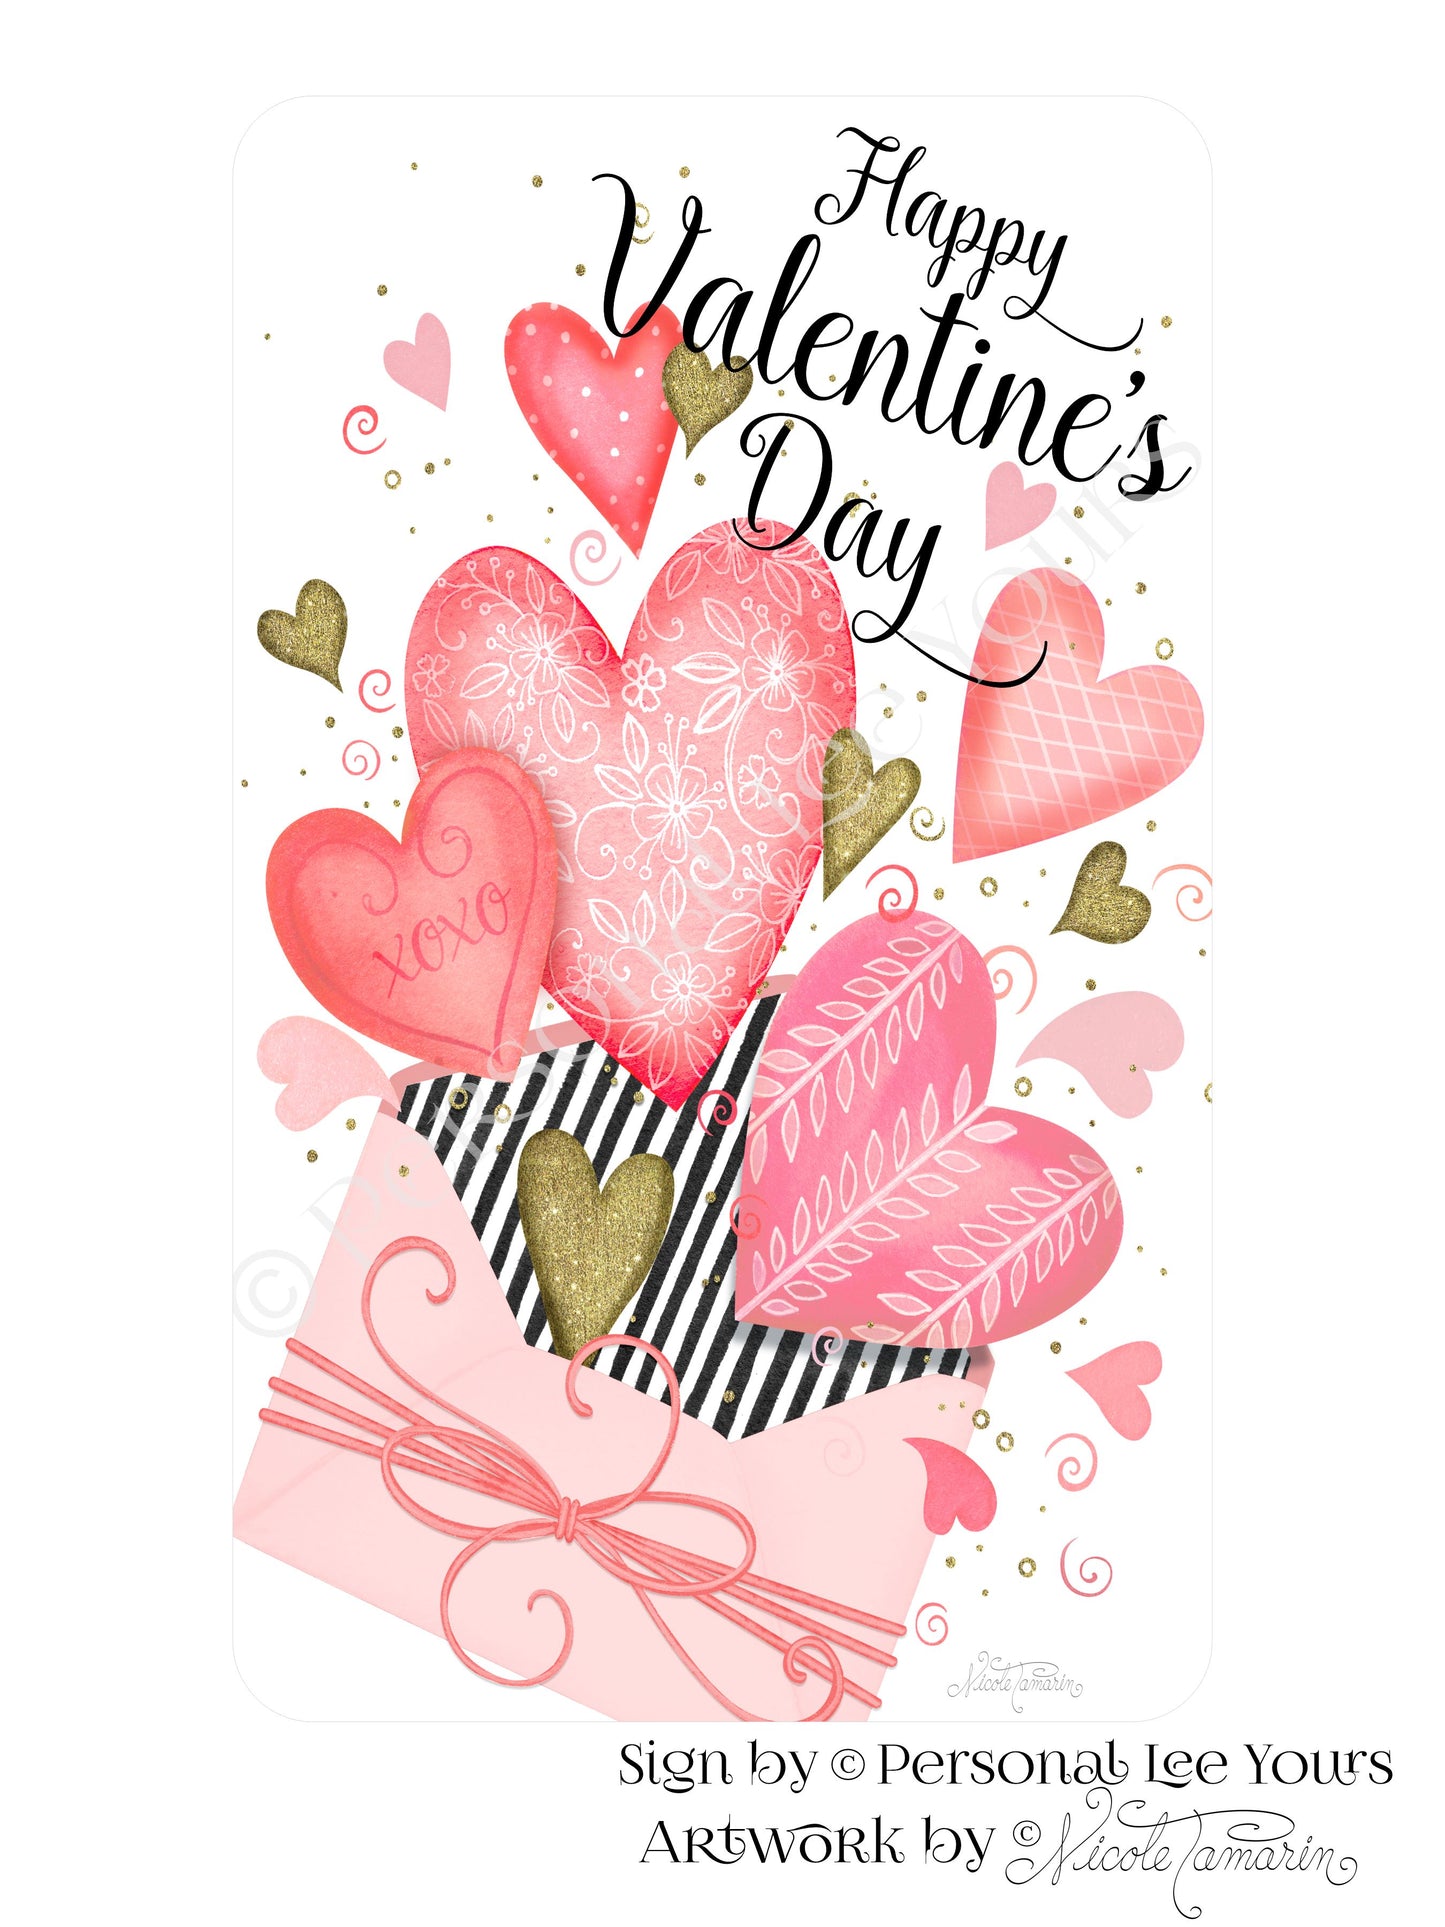 Nicole Tamarin Exclusive Sign * Happy Valentine's Day * Envelope Full Of Love * 3 Sizes * Lightweight Metal